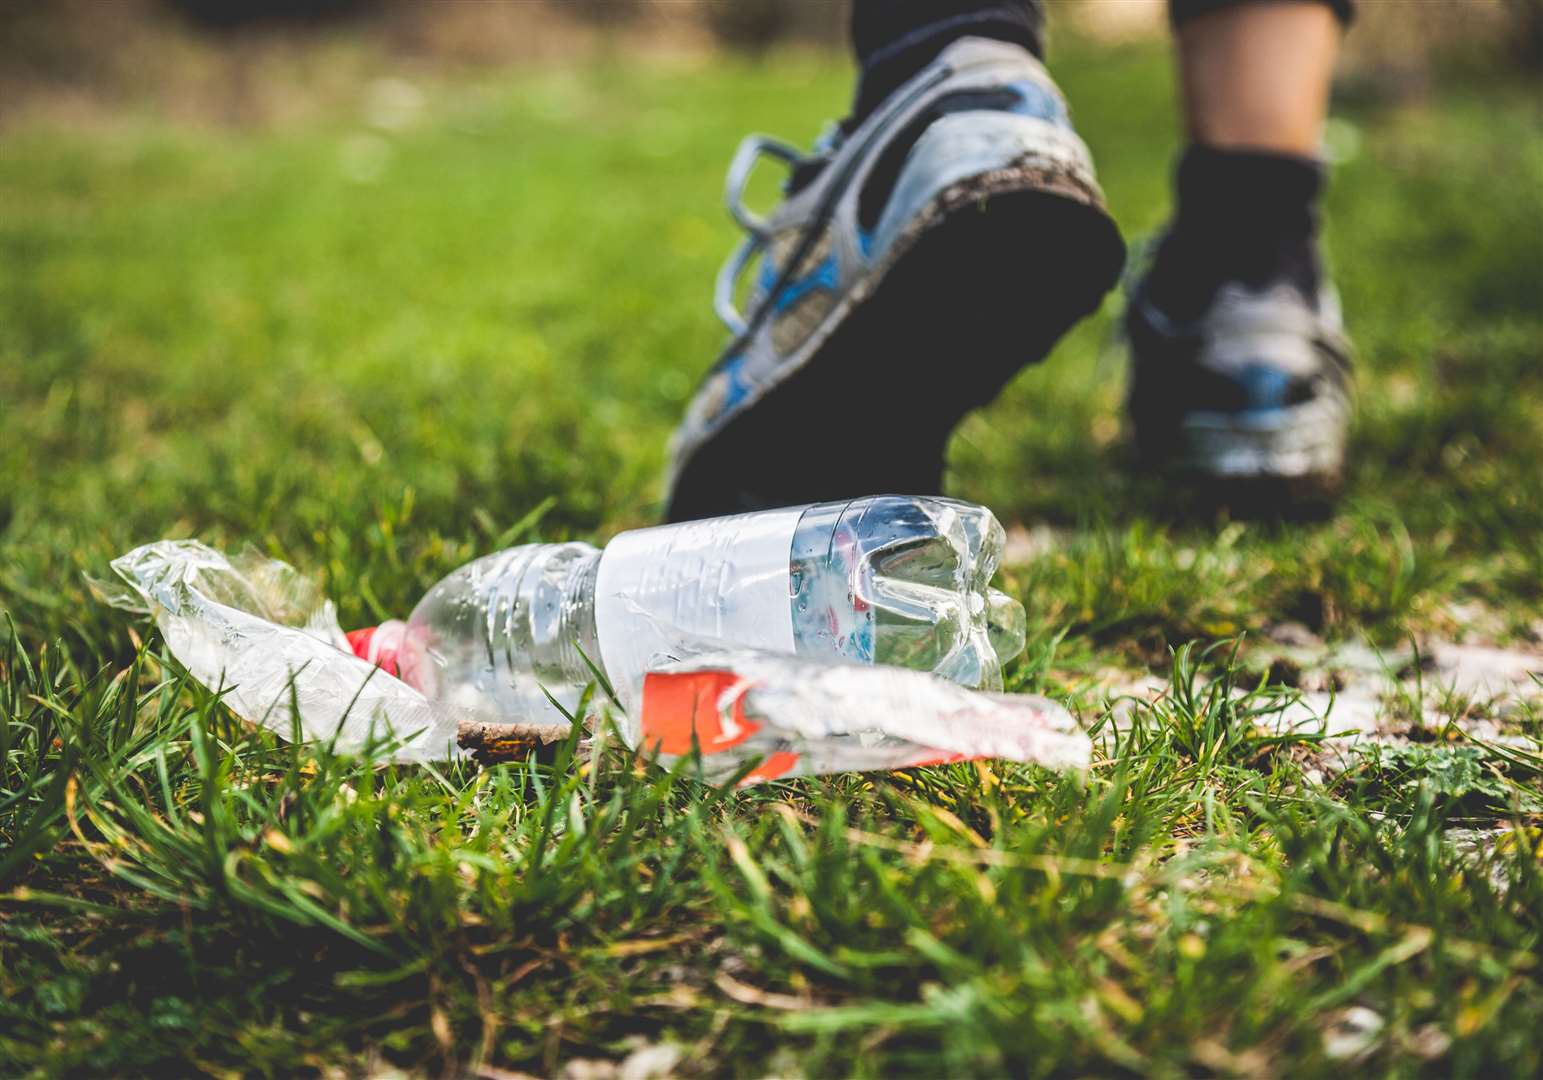 Ministers want to takle the amount of plastic in the environment. Image: iStock.